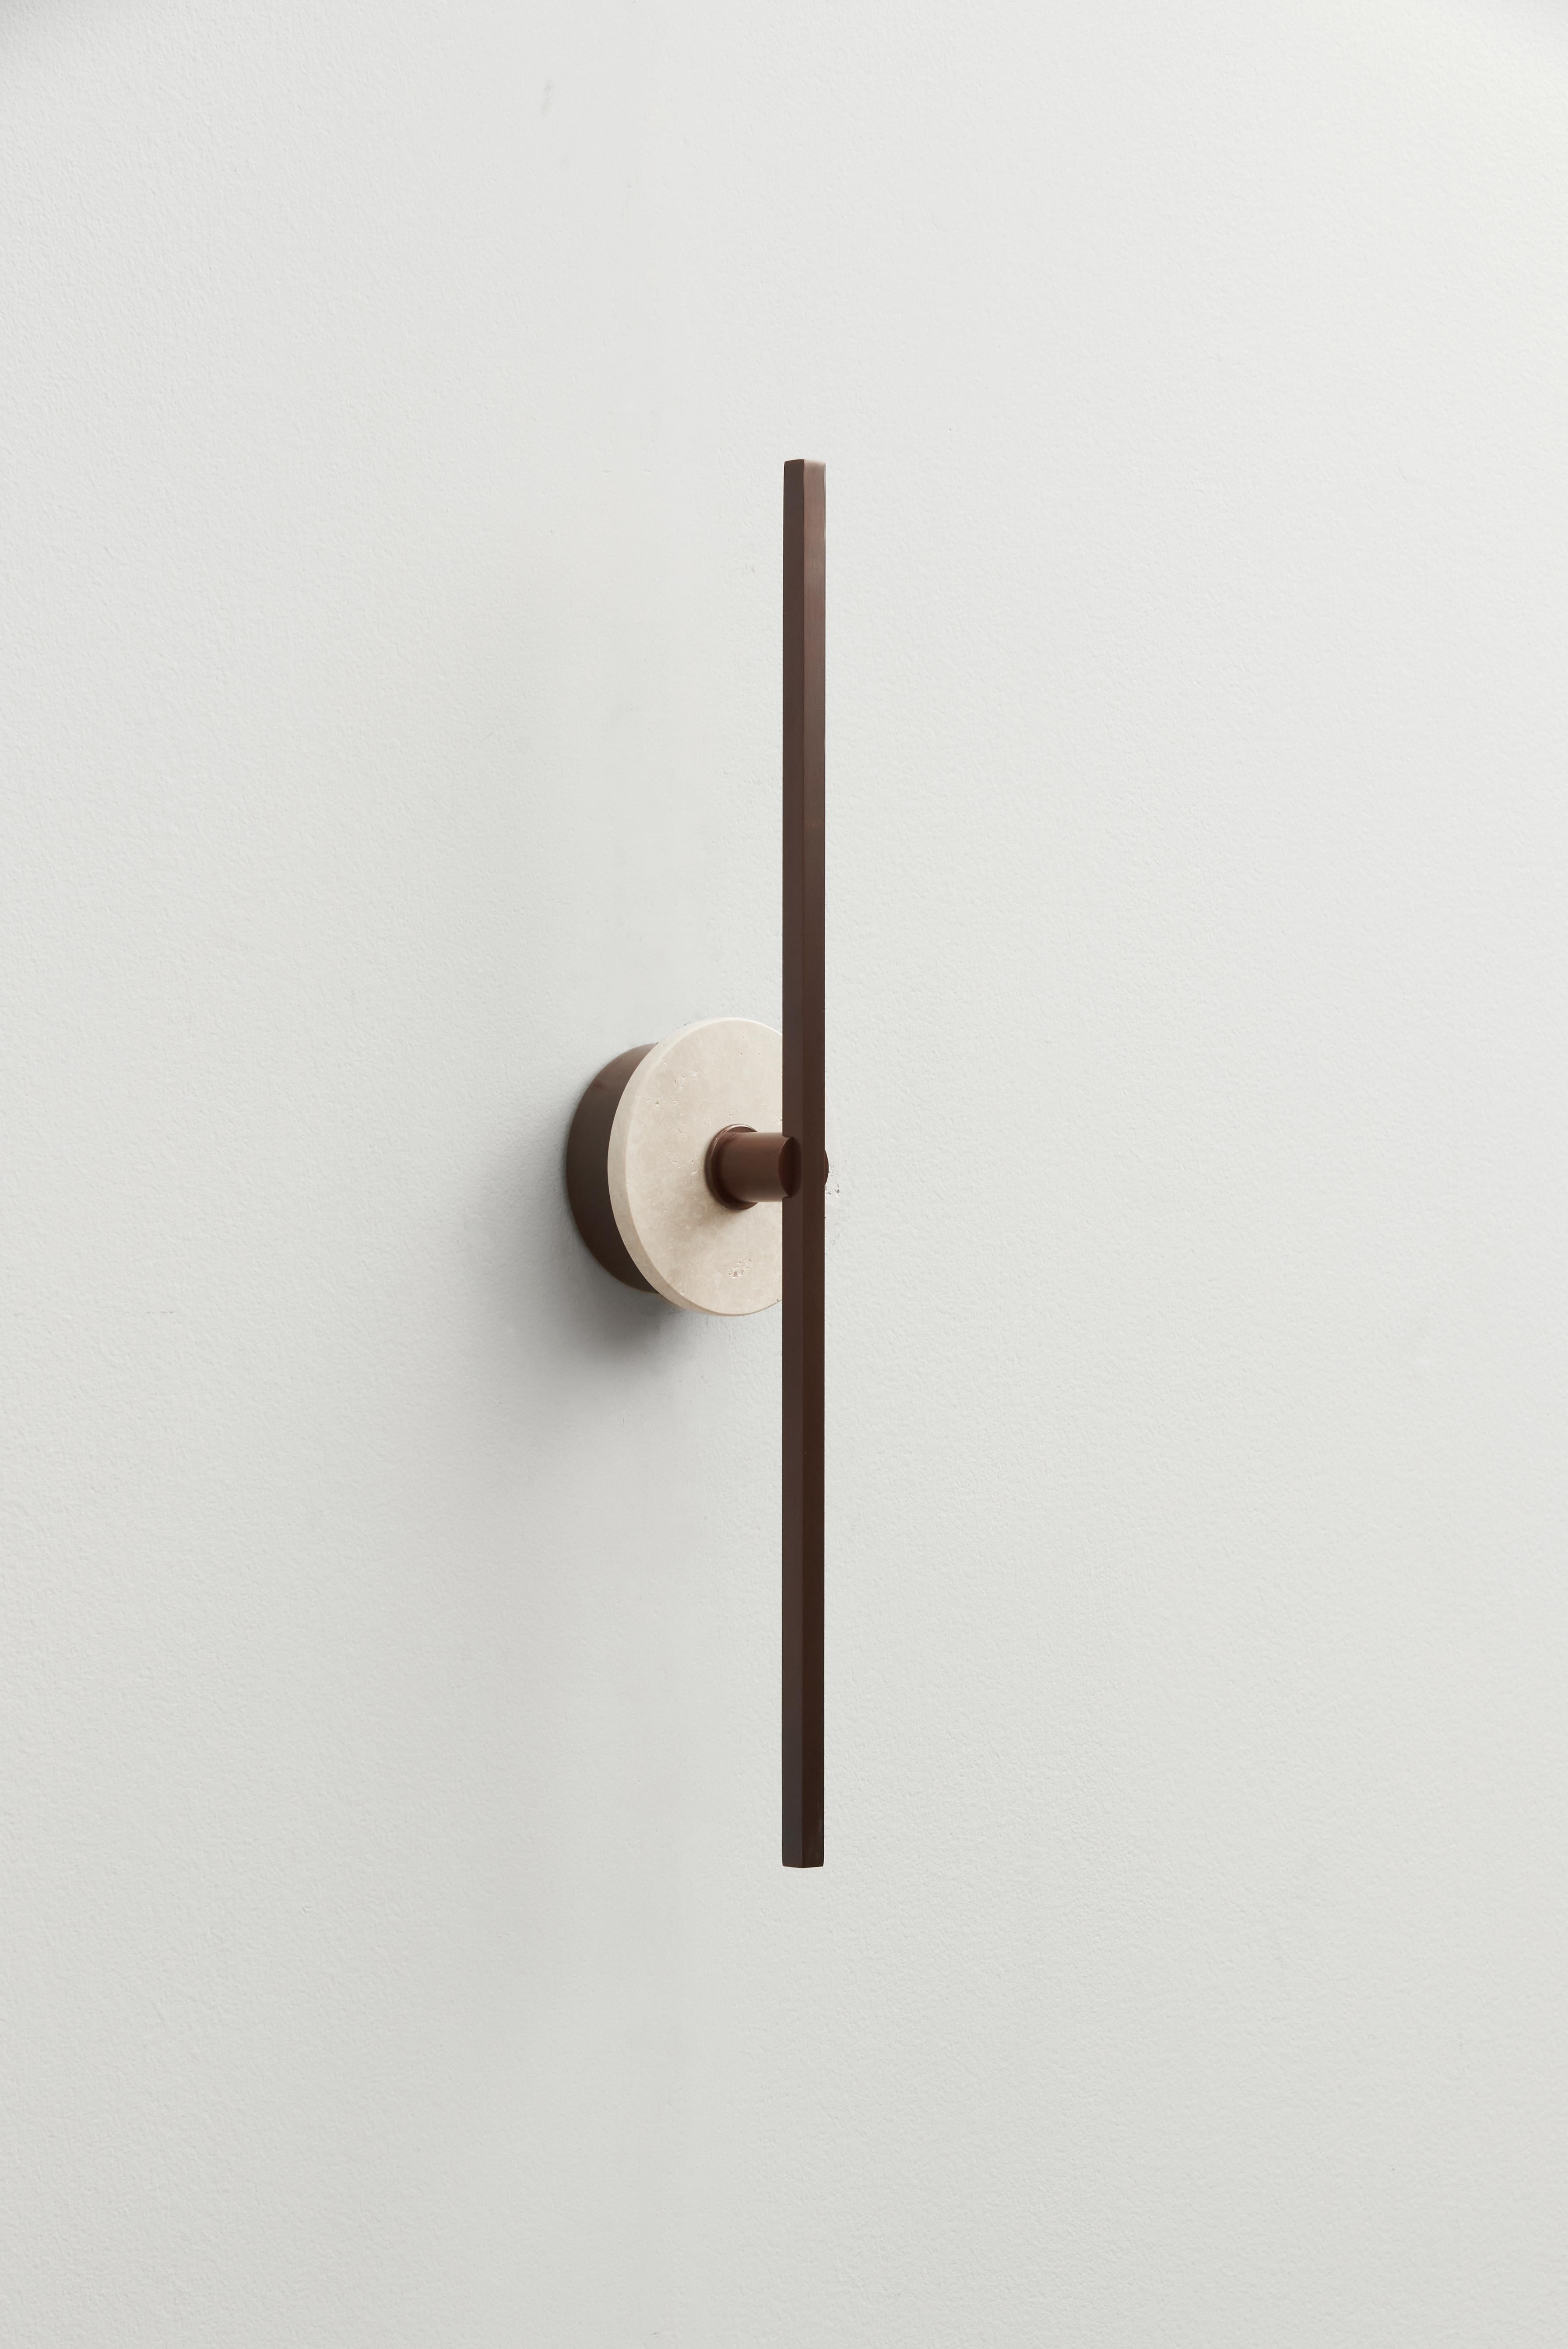 The Stick wall sconce it's a beautifully designed lighting fixture that combines both form and function. The use of thin bronze profiles and LED technology create a minimalist aesthetic, while also providing efficient and powerful lighting.

In